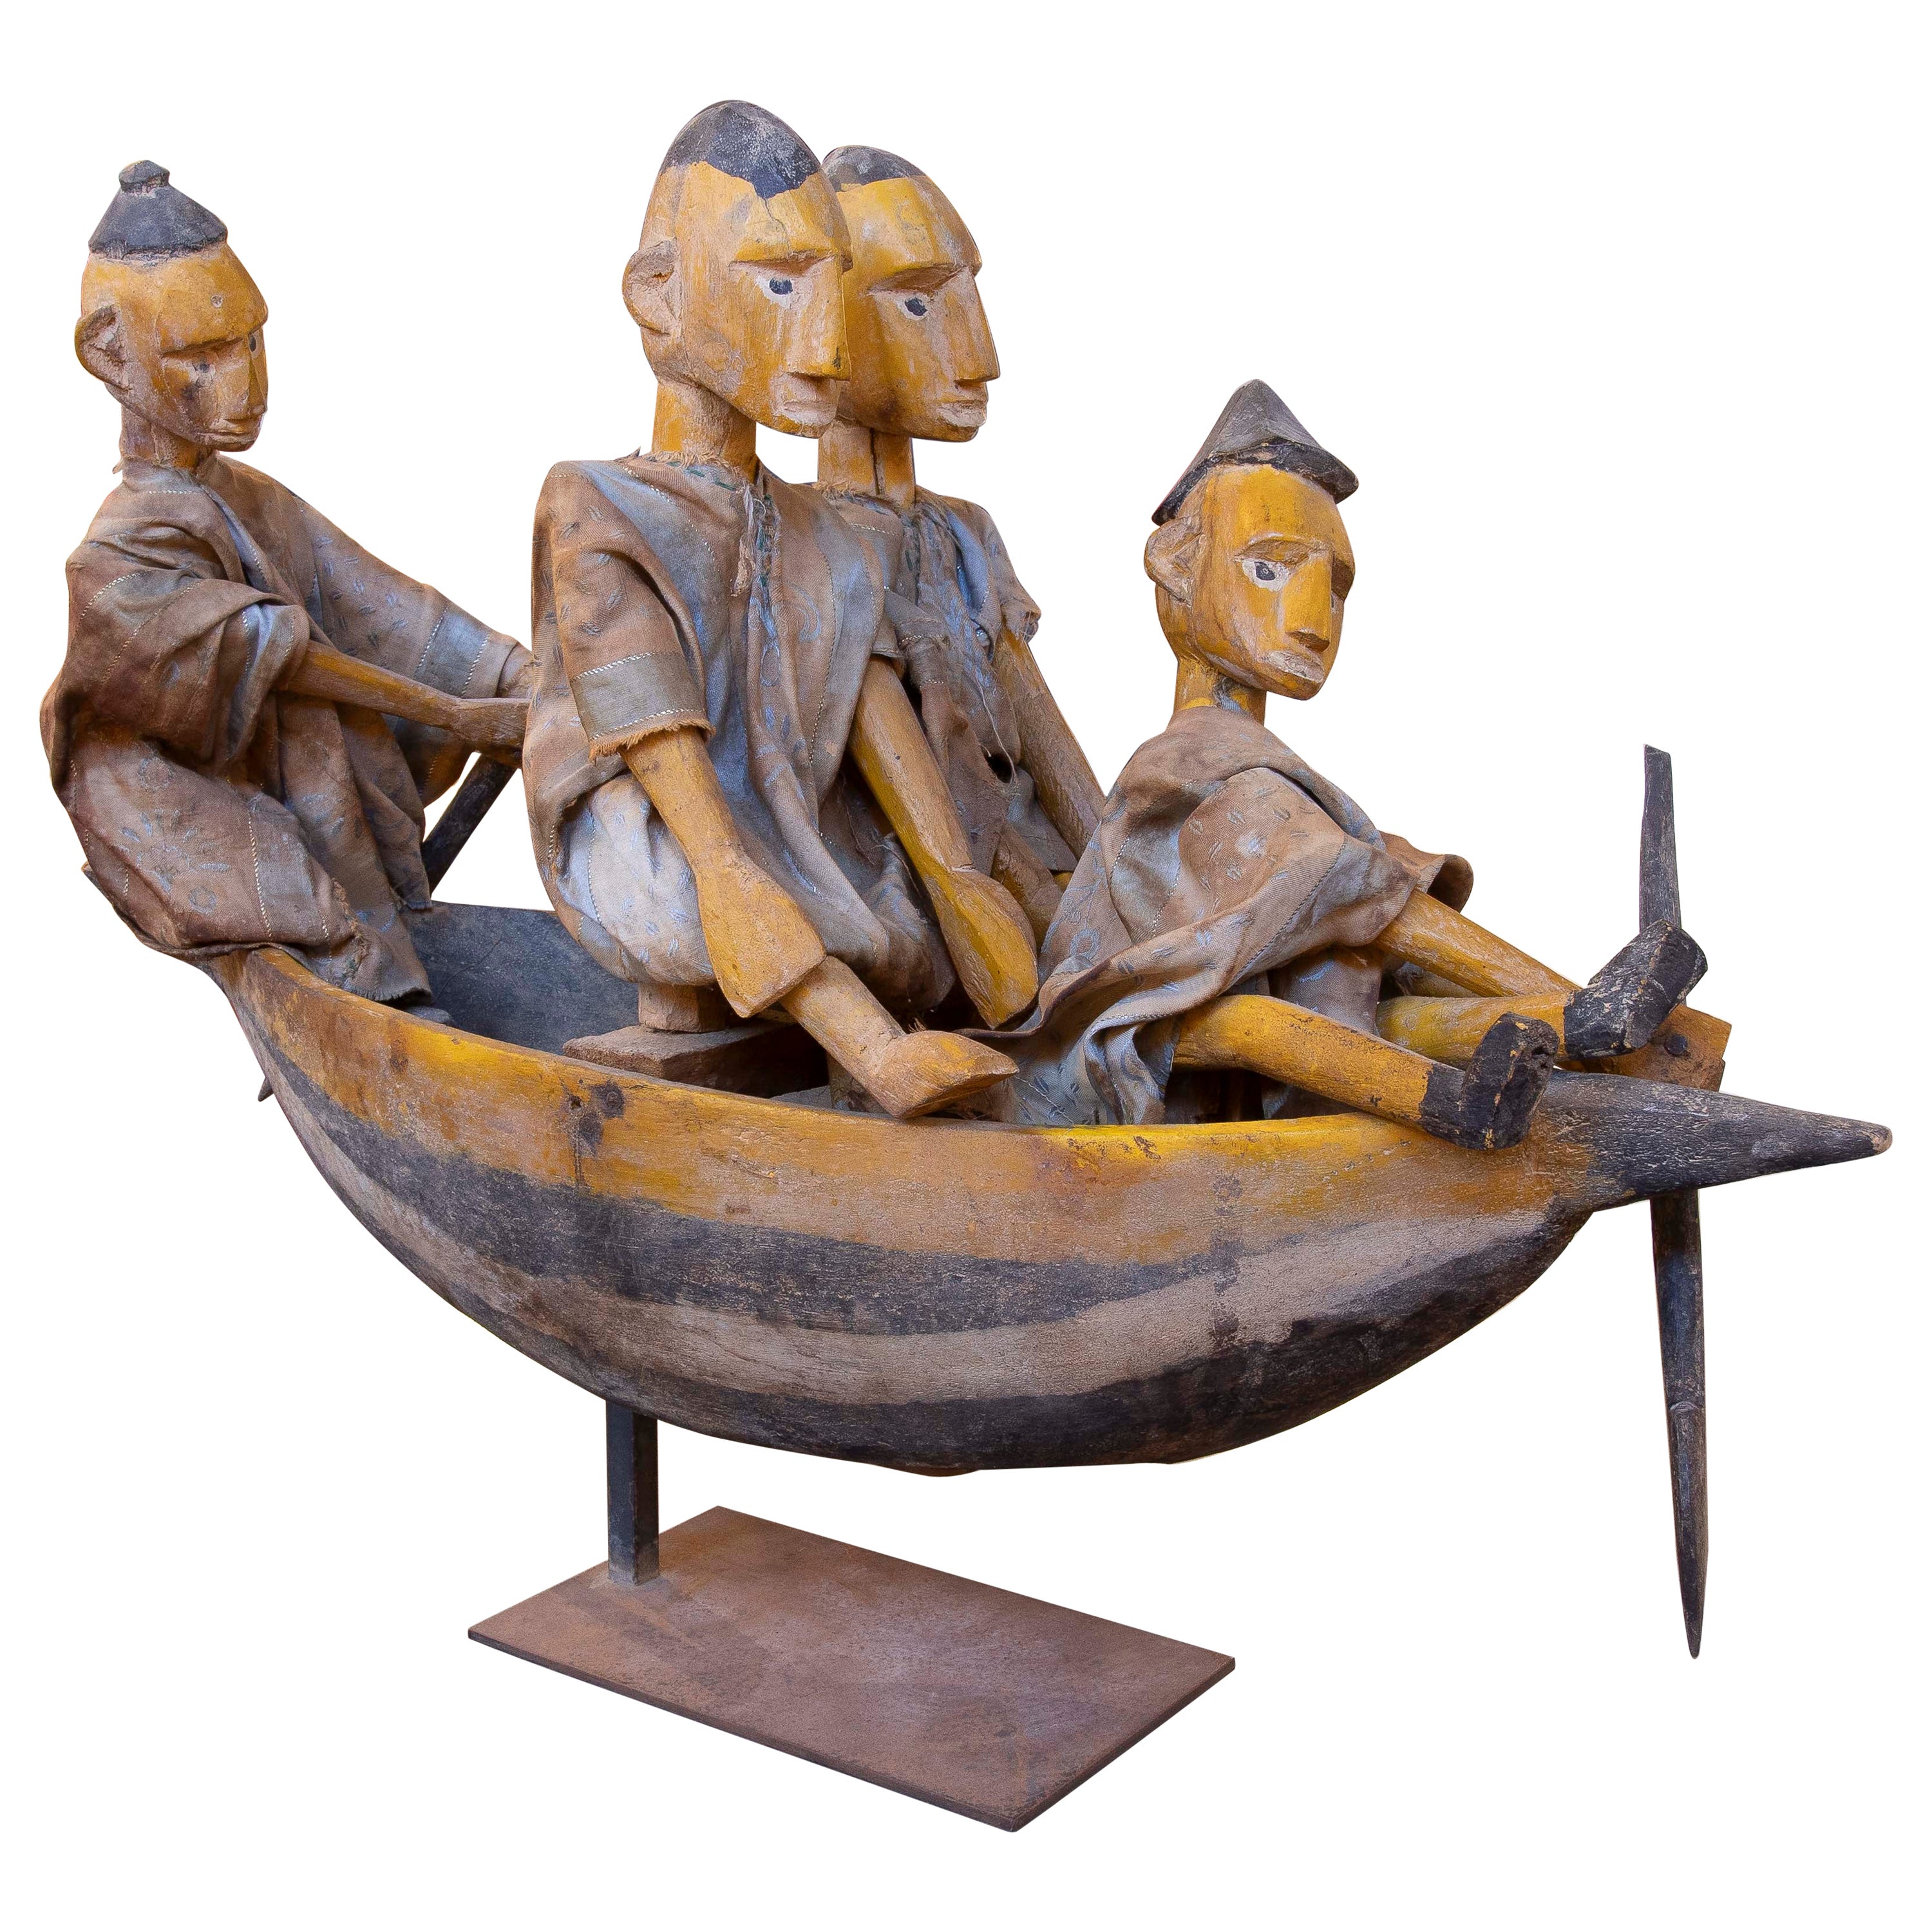 Sculpture Carved in Wood of Characters in a Boat with Cloth Costumes For Sale